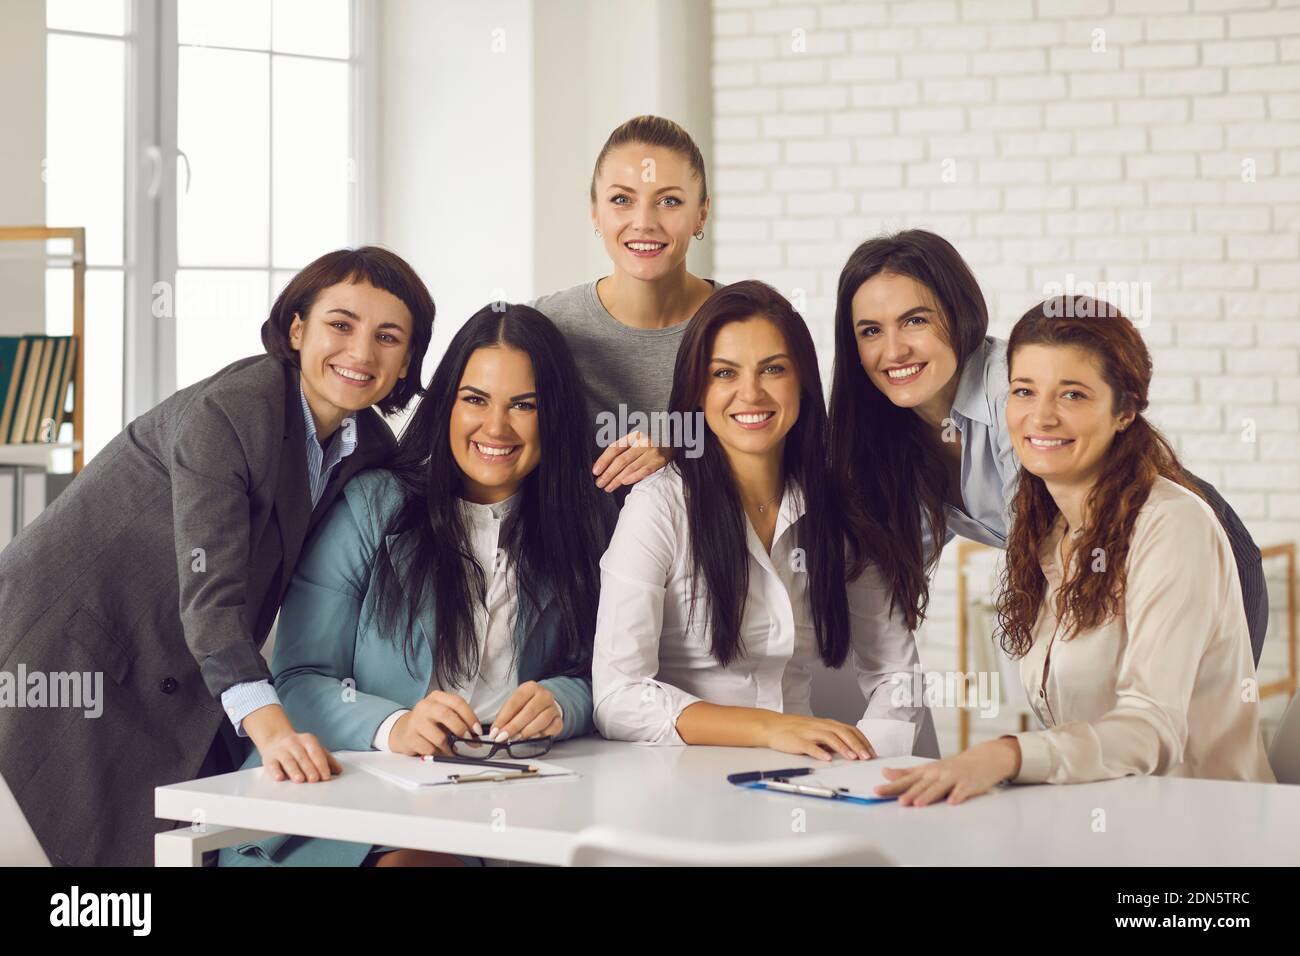 Smiling businesswomen looking at camera during brainstorming in office Stock Photo